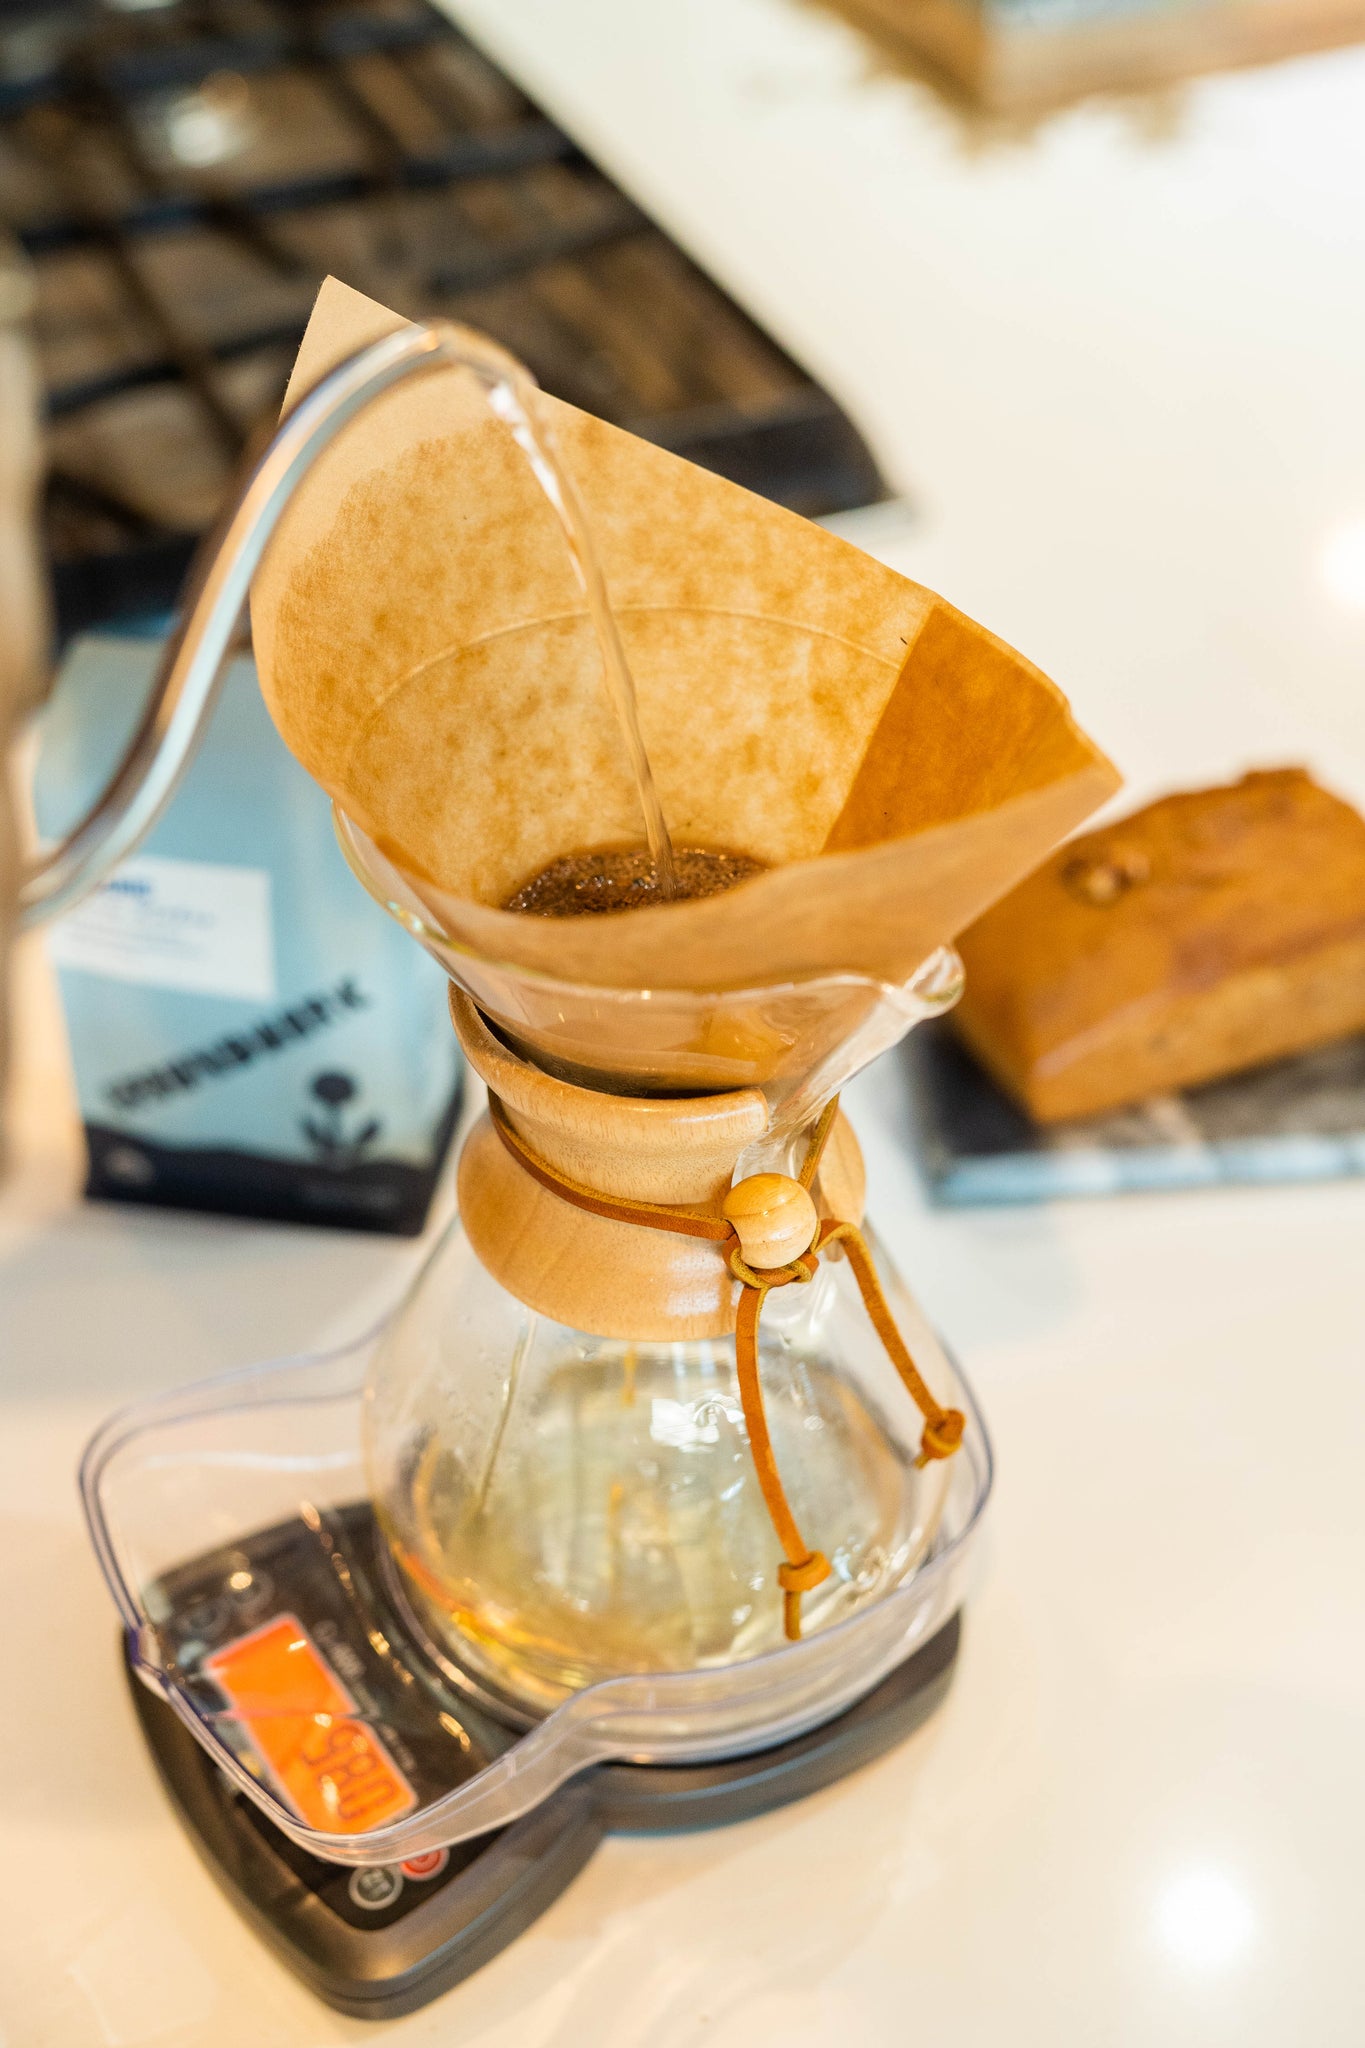 Chemex brewer on kitchen counter, brewing seasonal select coffee with a kettle